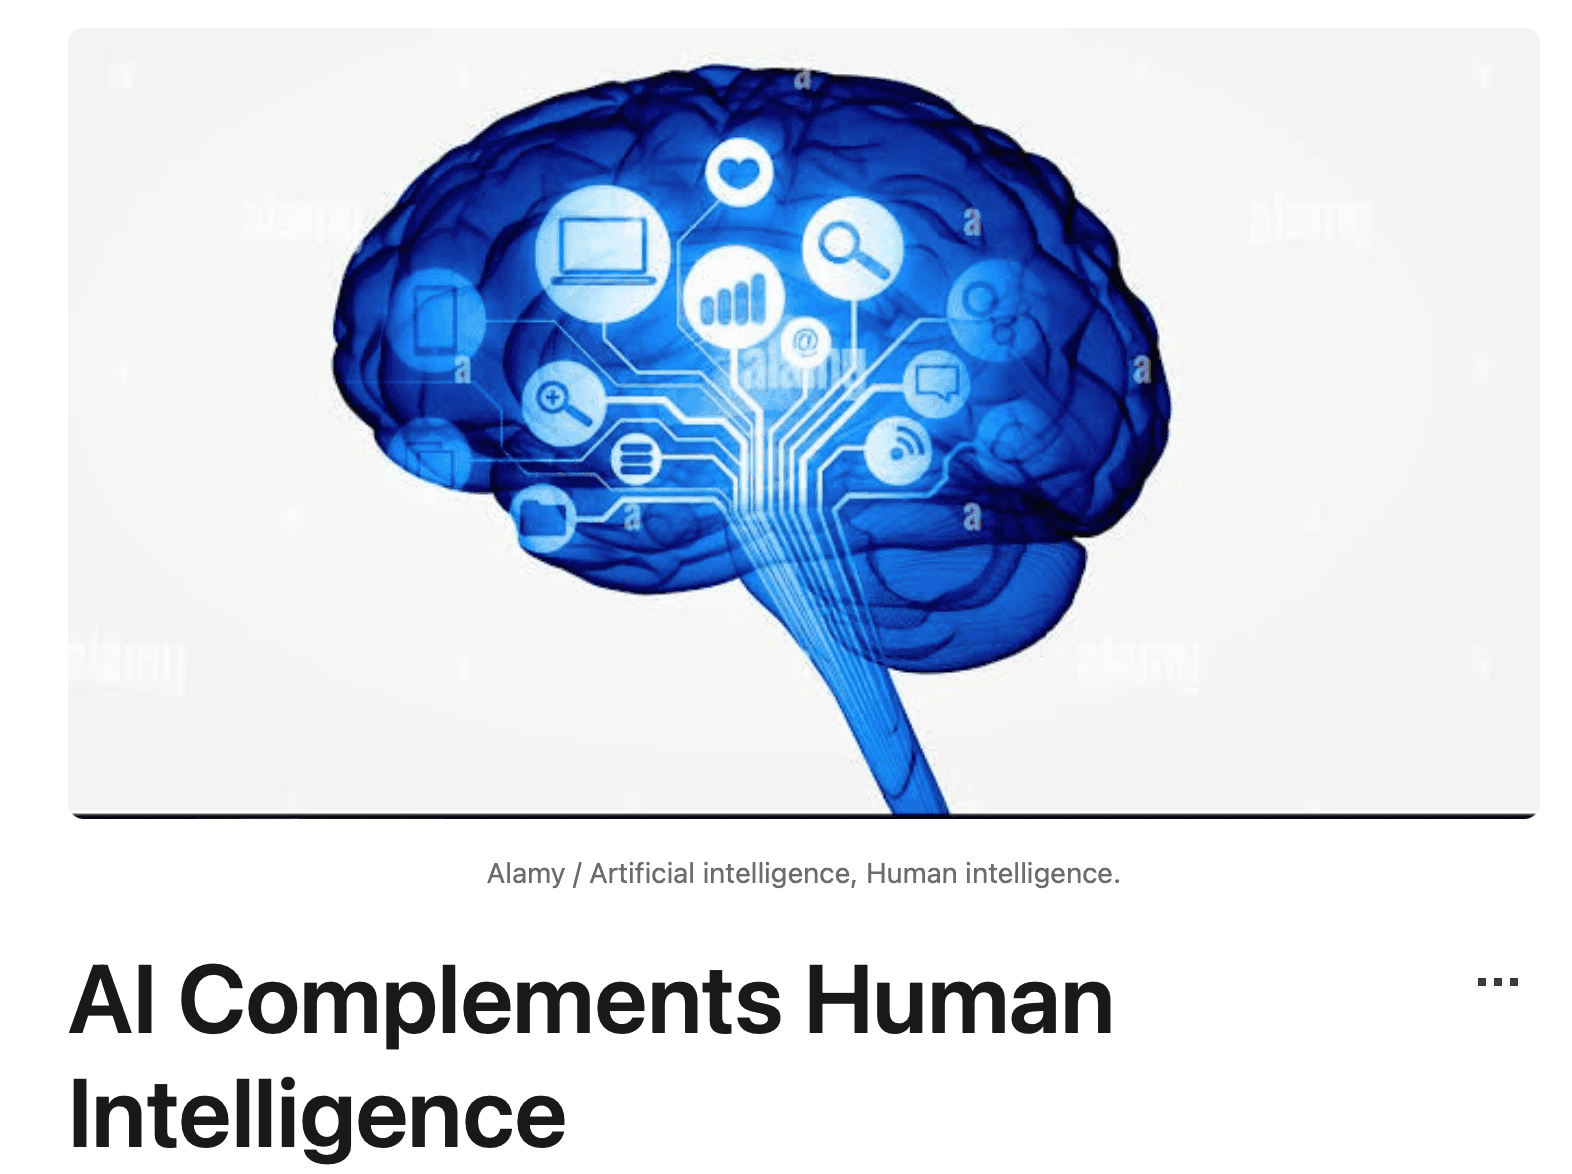 AI complements Human Intelligence with illustration of AI in brain